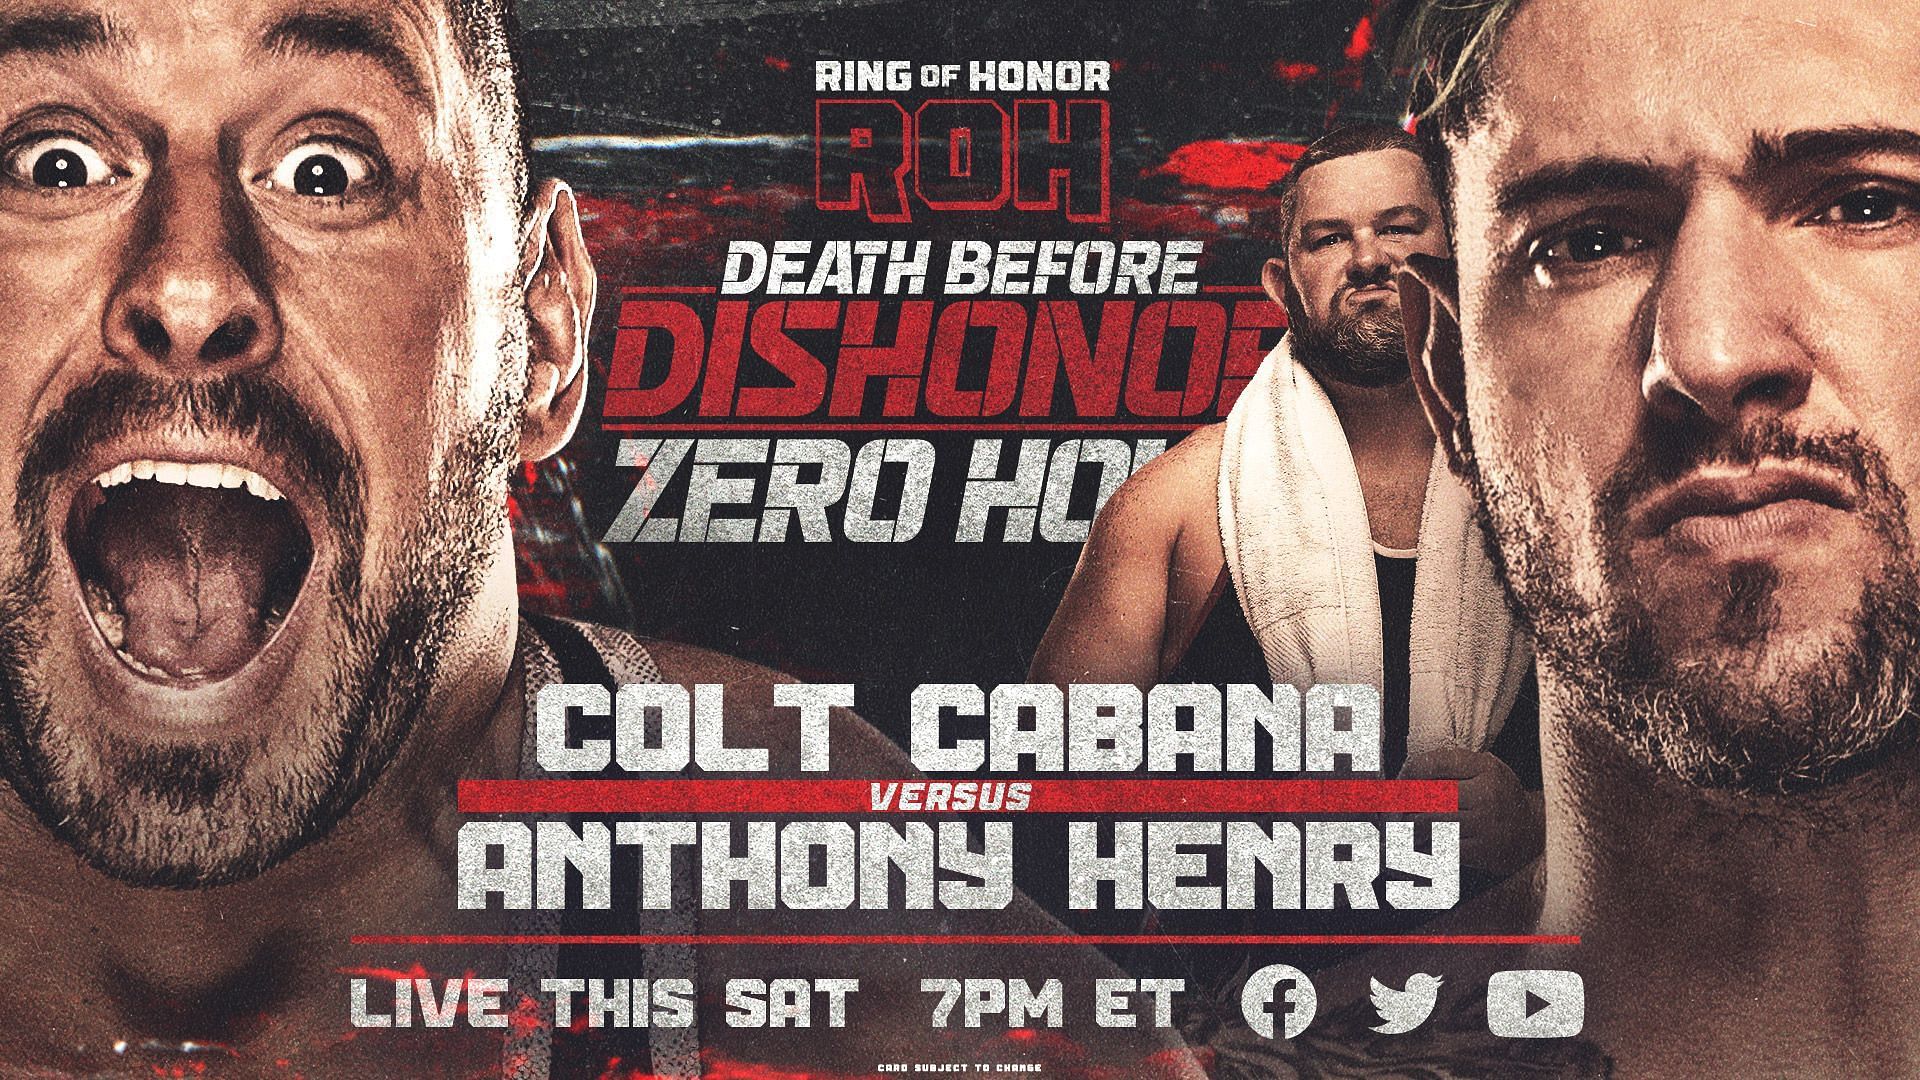 Colt Cabana finds a spot on the Death Before Dishonor card